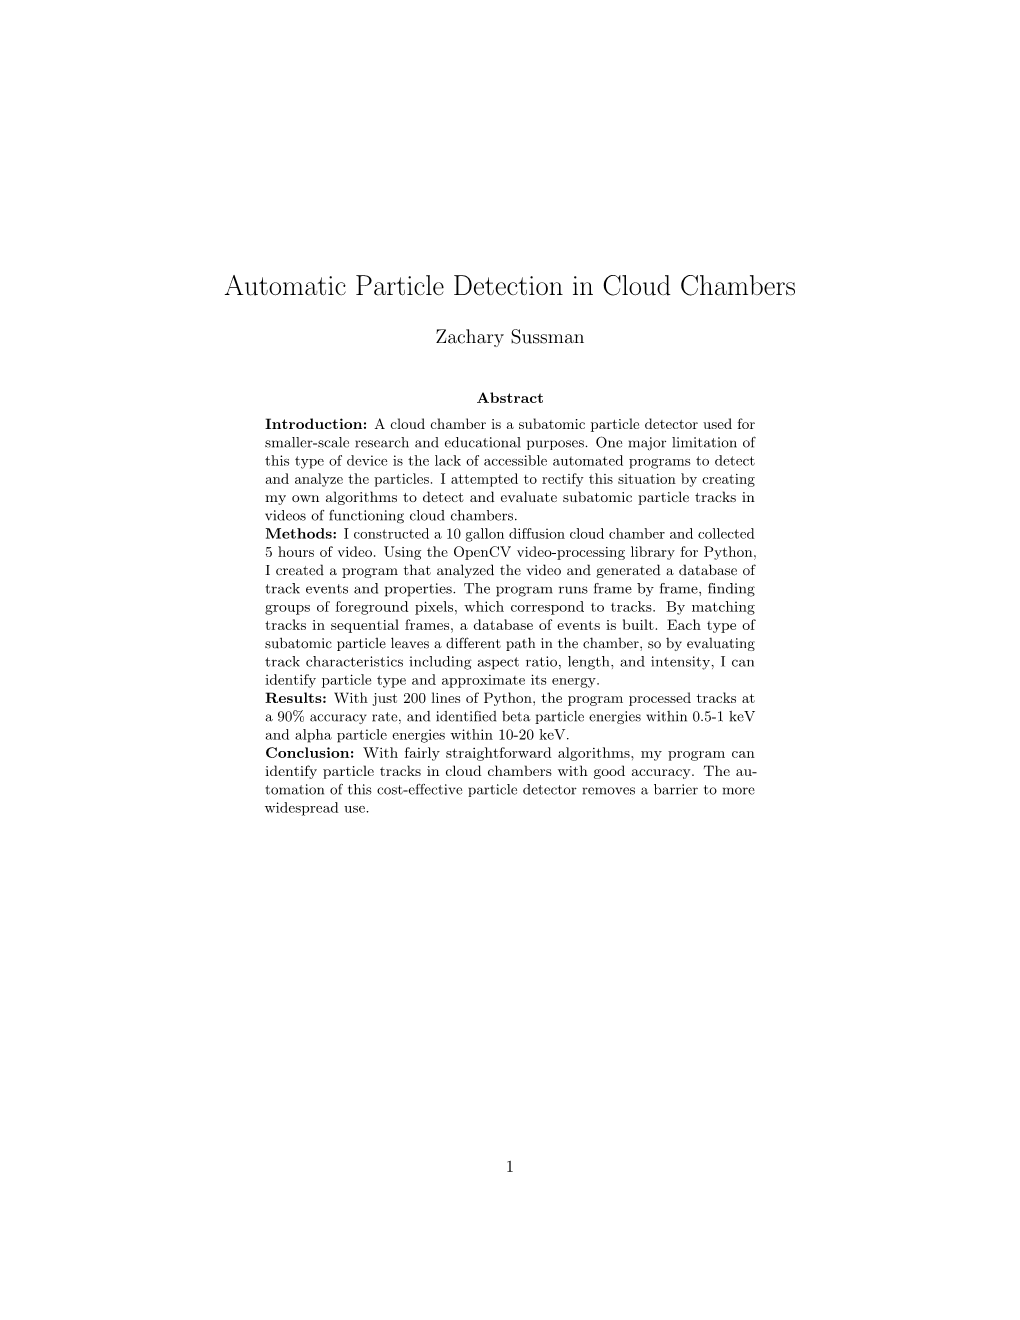 Automatic Particle Detection in Cloud Chambers